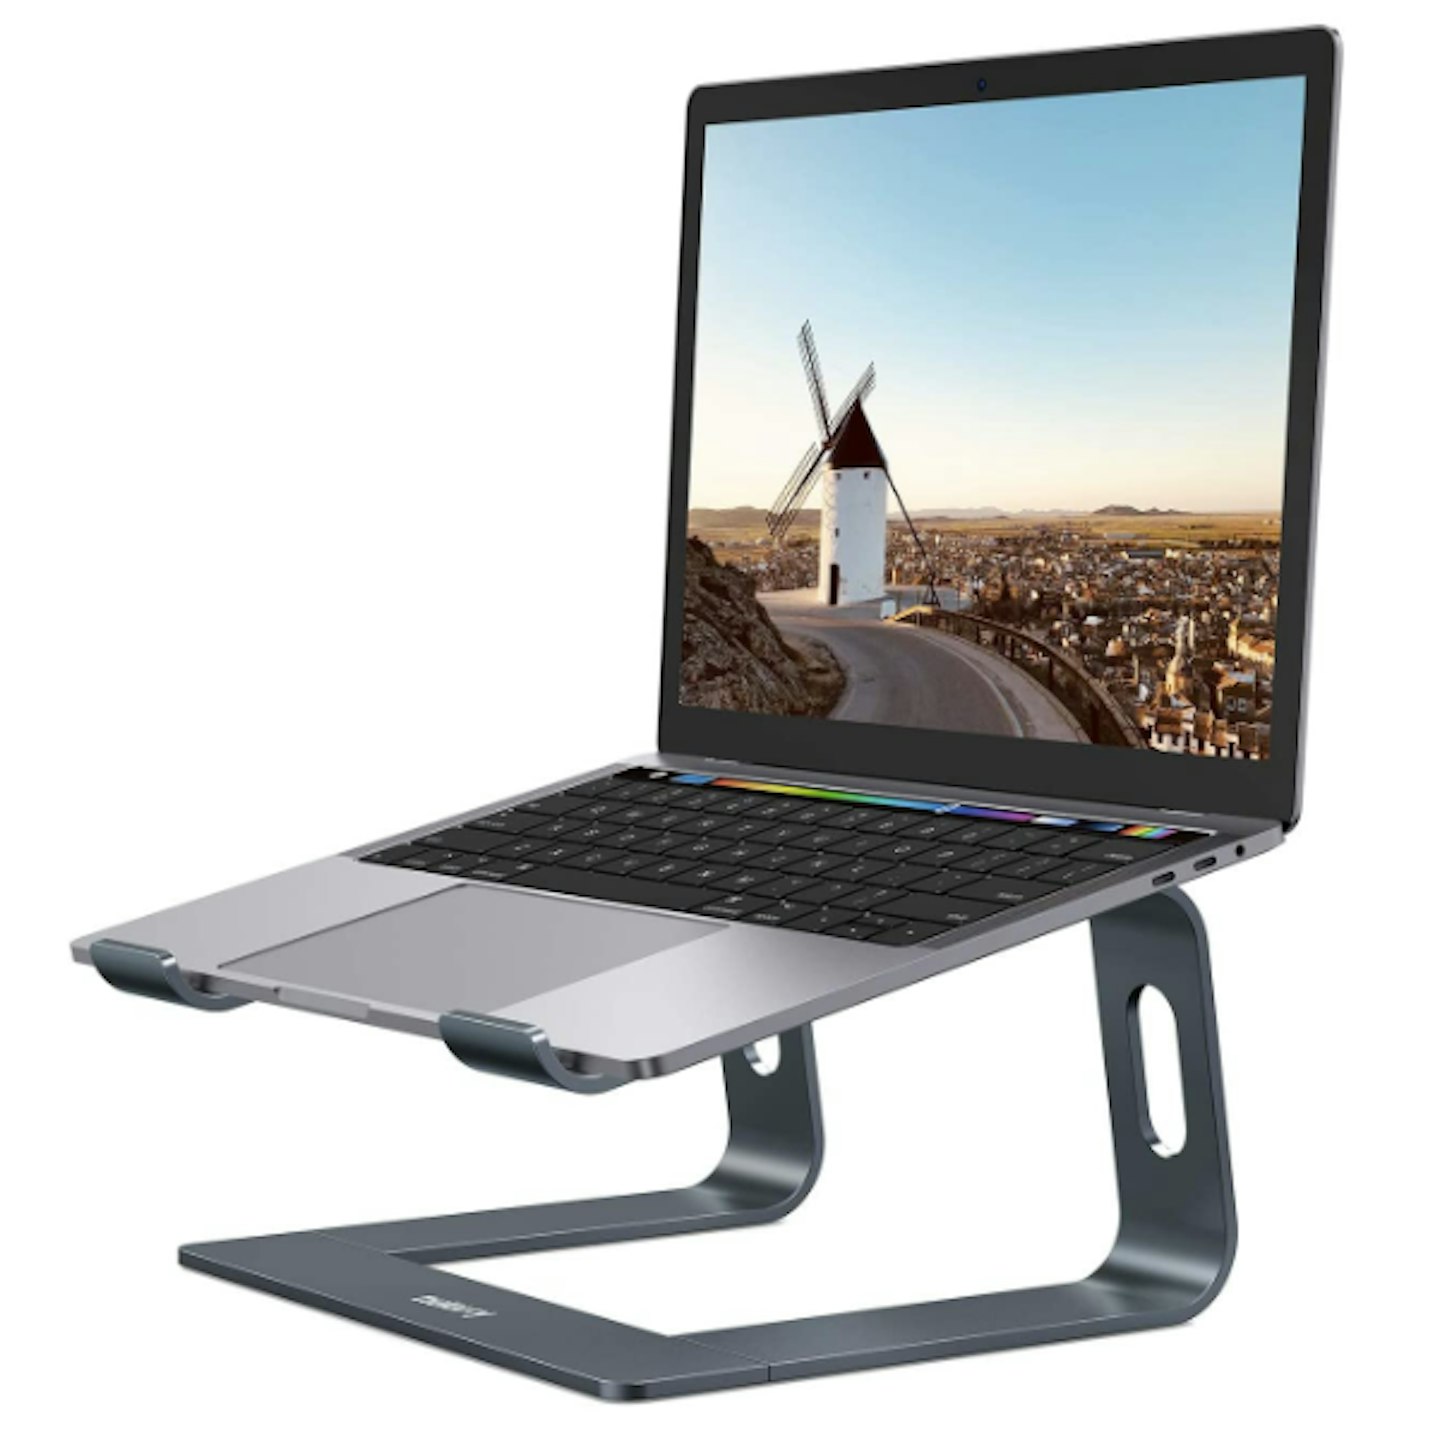 Nulaxy Laptop and Notebook Stand